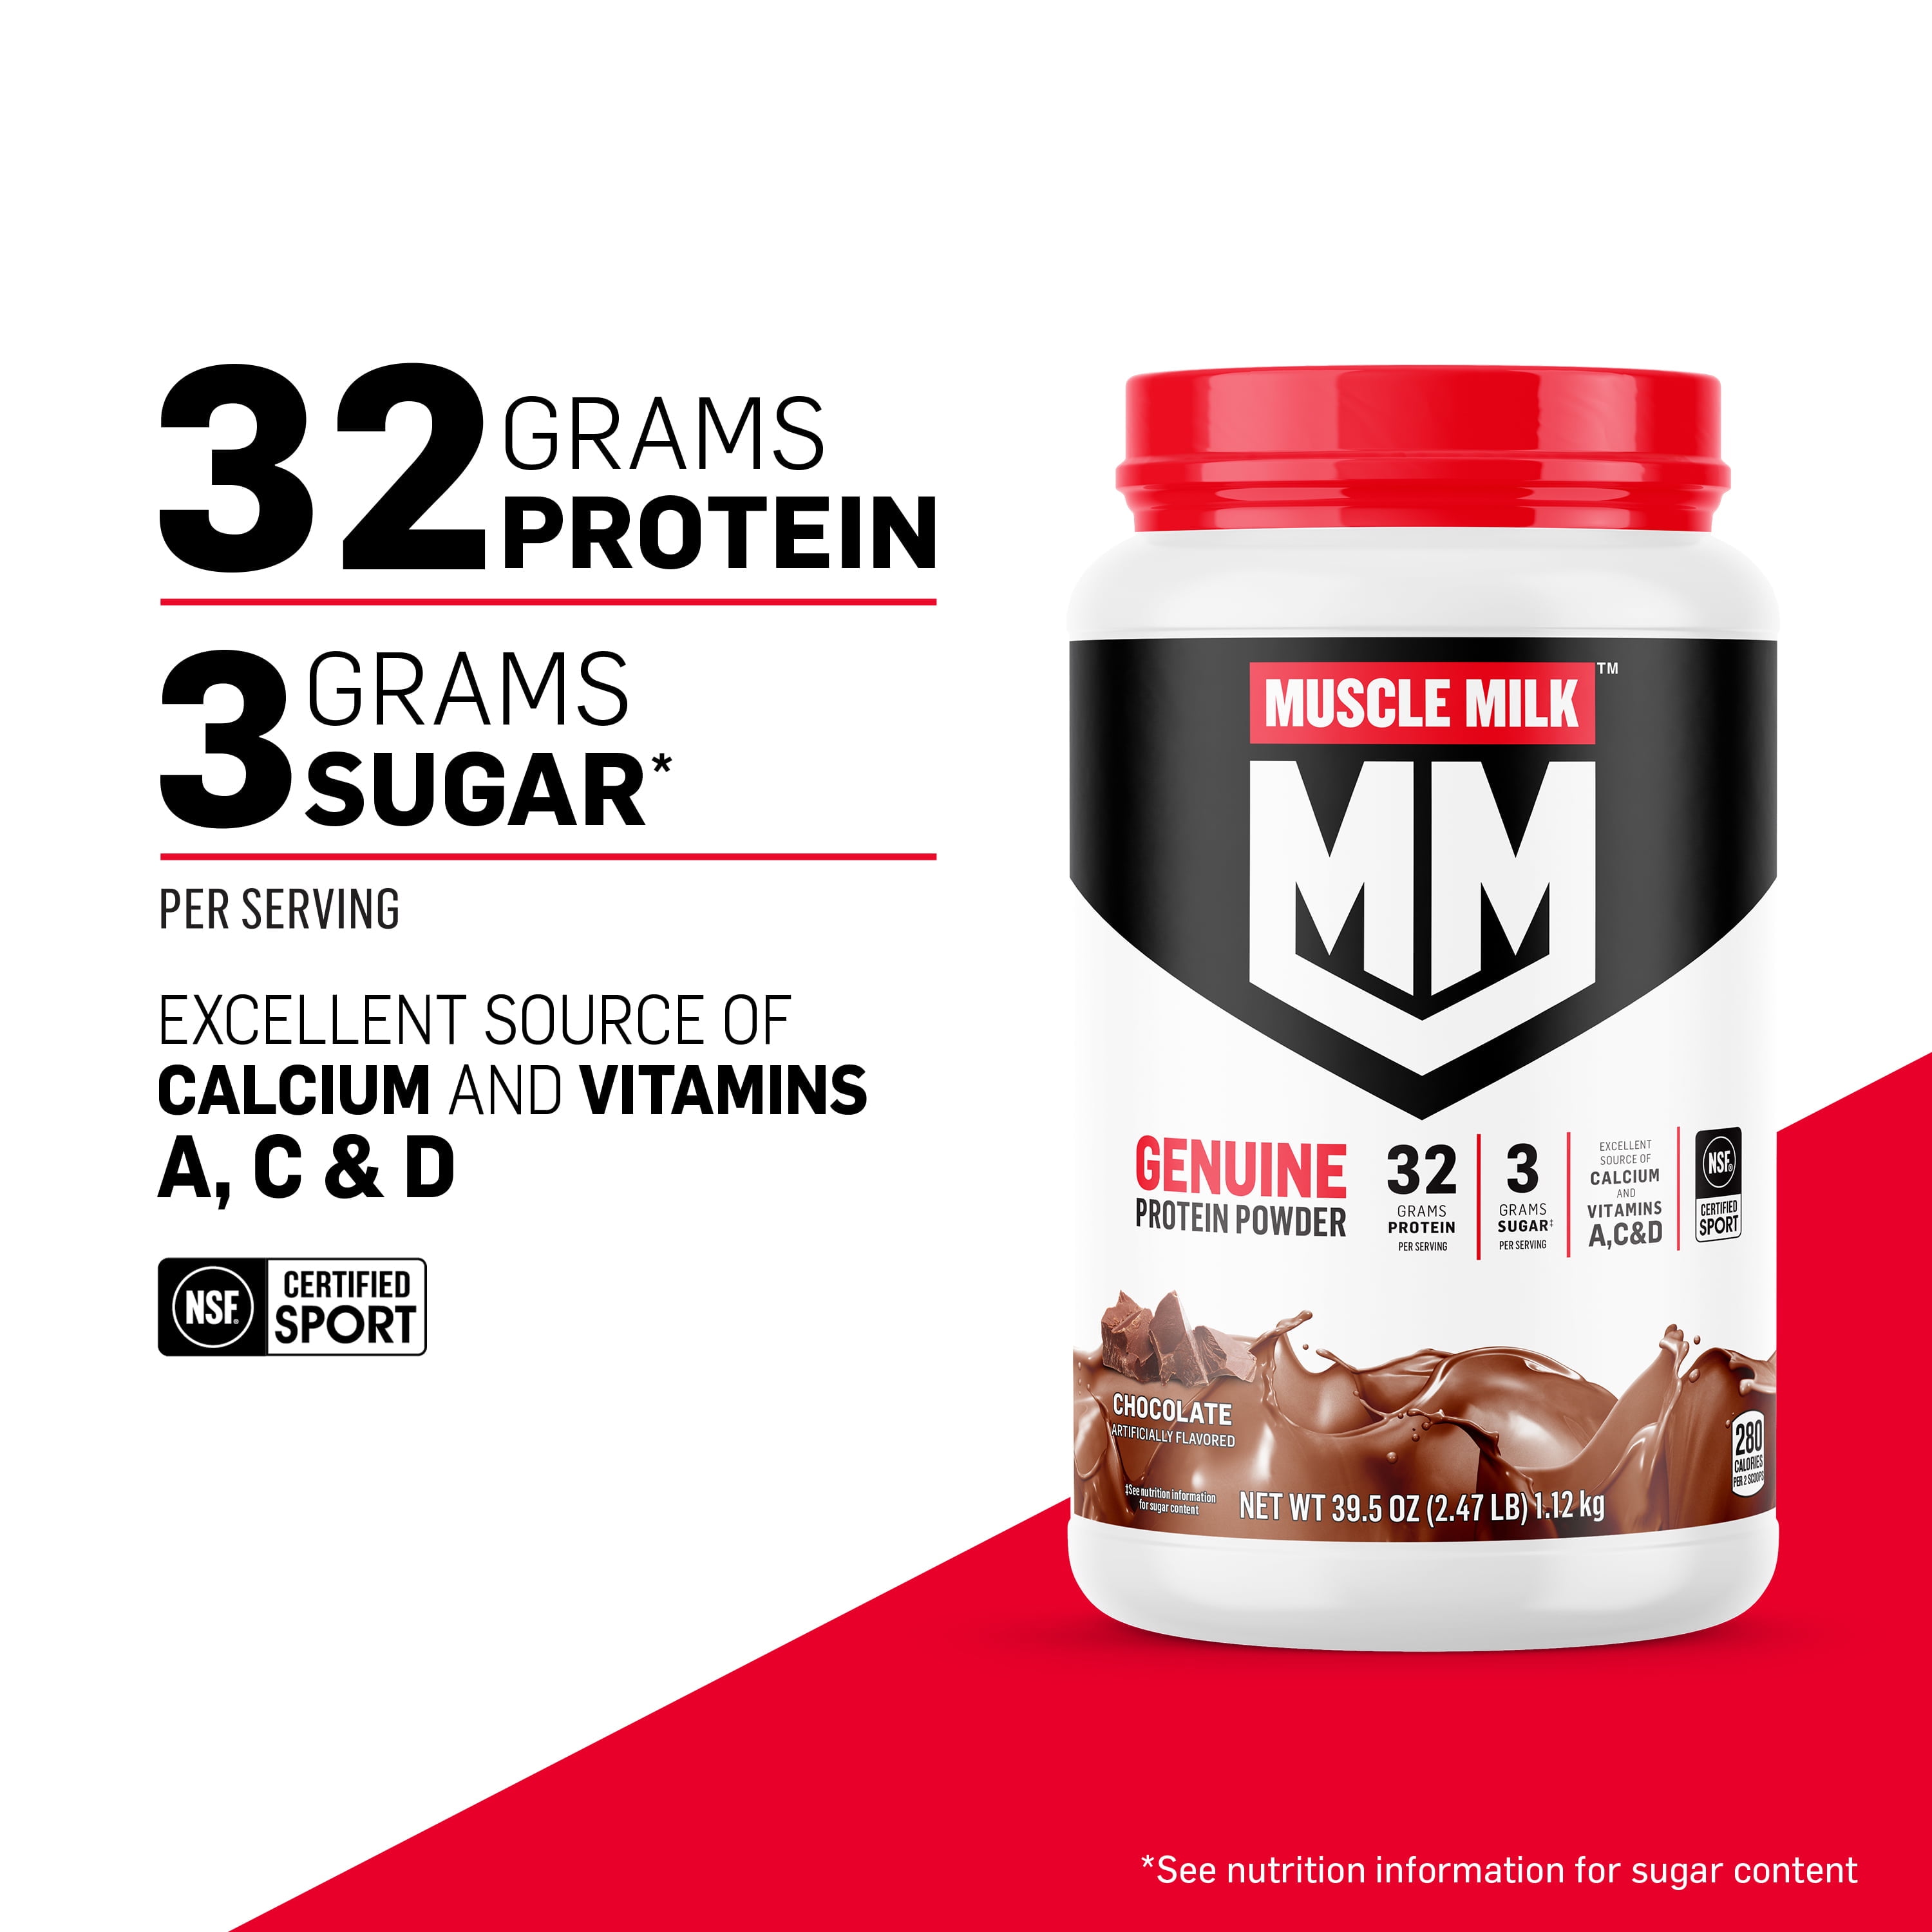 Muscle Milk Lean Muscle Vanilla Creme Protein Powder, 1.93 Pound (Pack of 1)